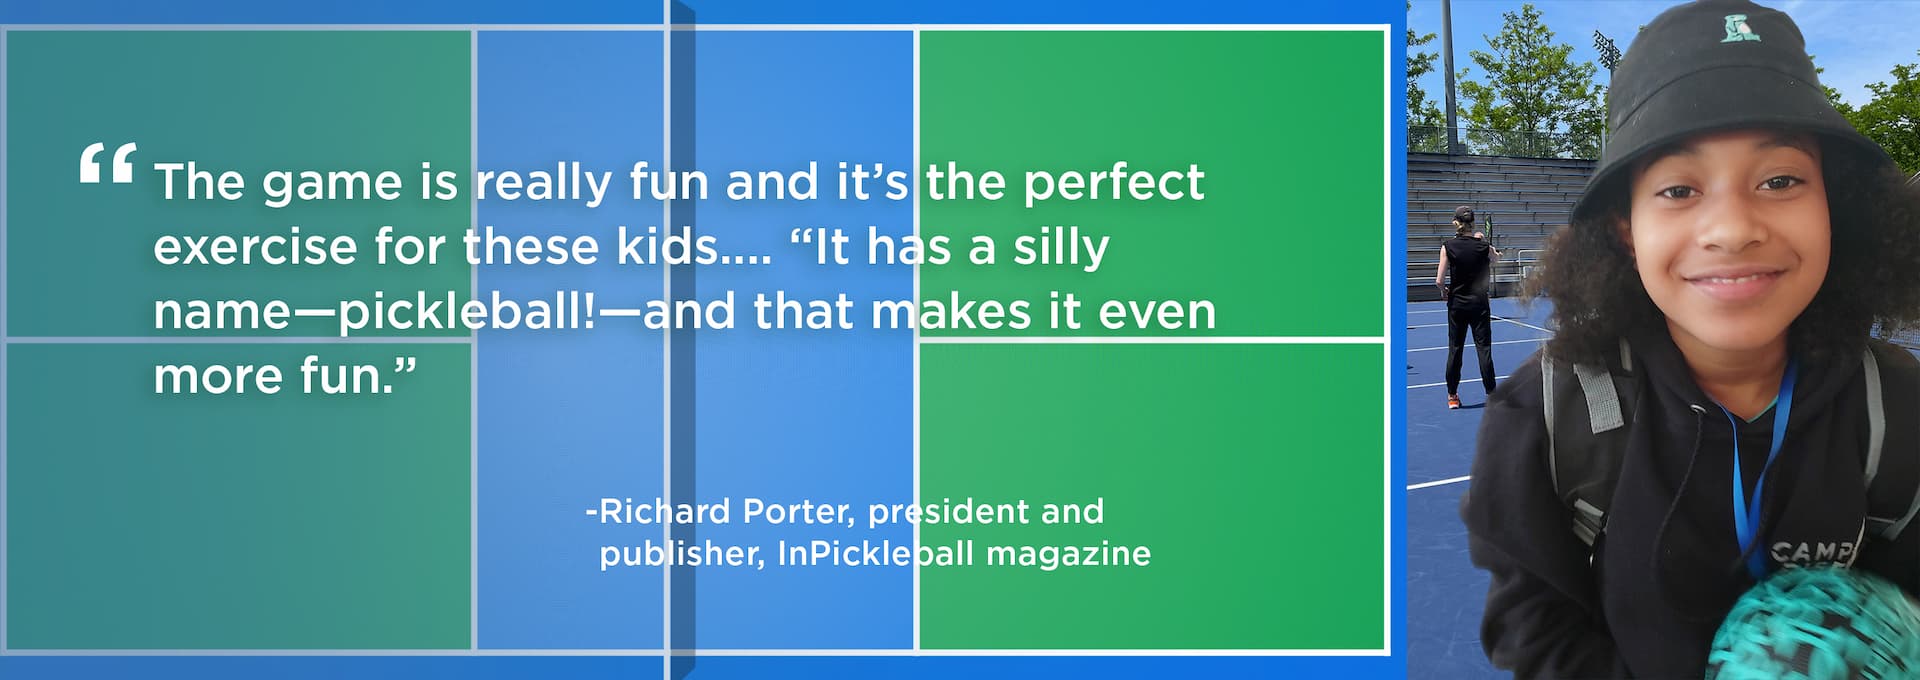 graphic with quote about pickleball from dick porter